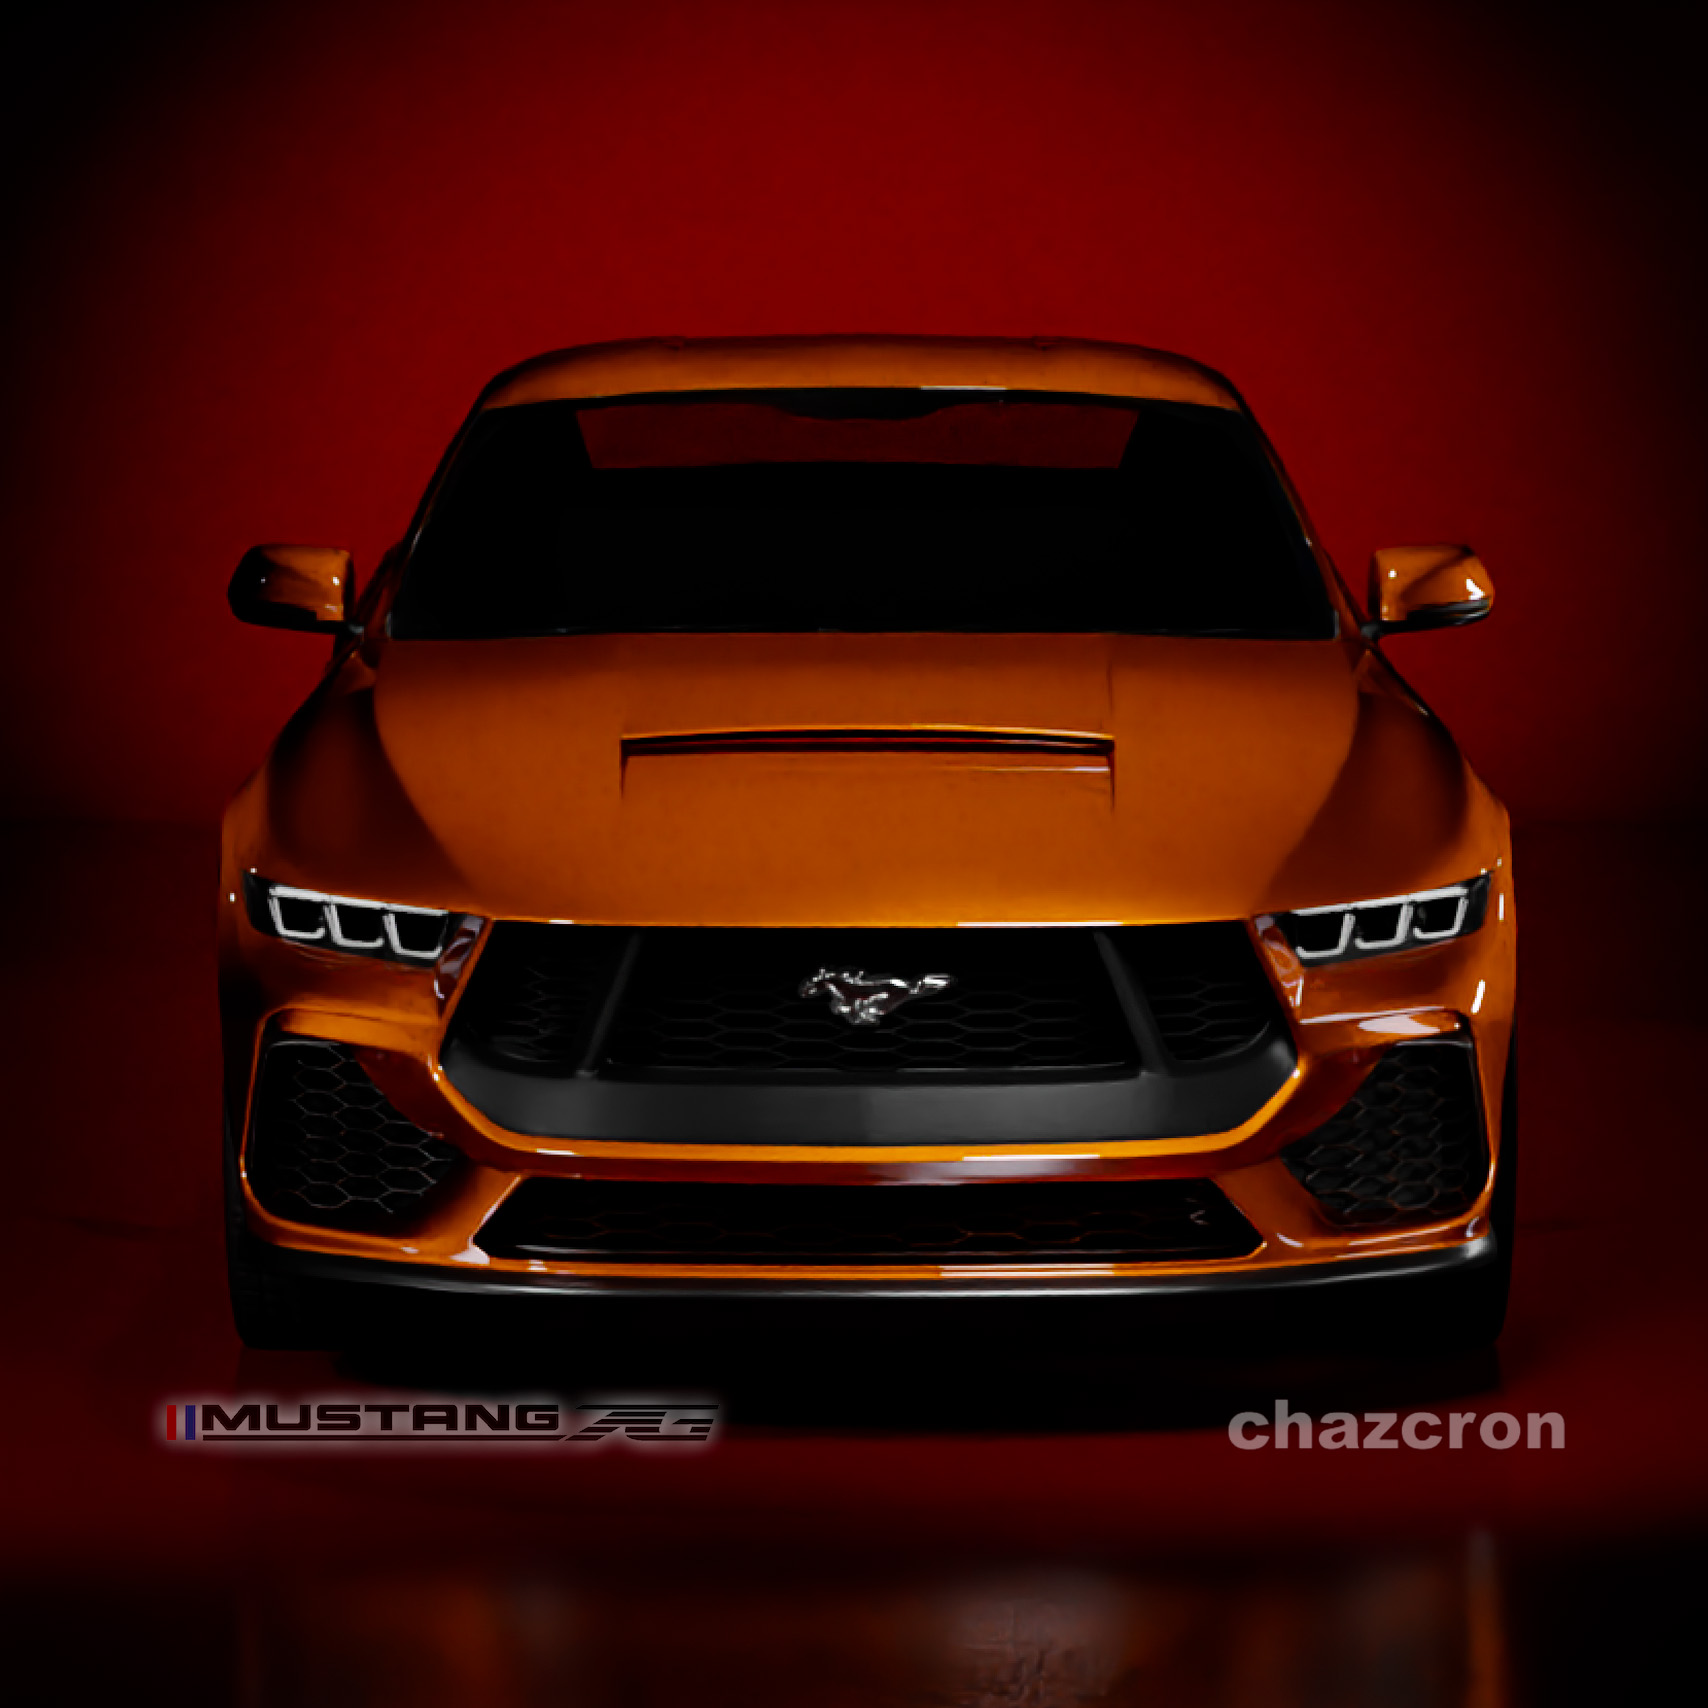 S650 Mustang chazcron weighs in... 7th gen 2023 Mustang S650 3D model & renderings in several colors! O-face